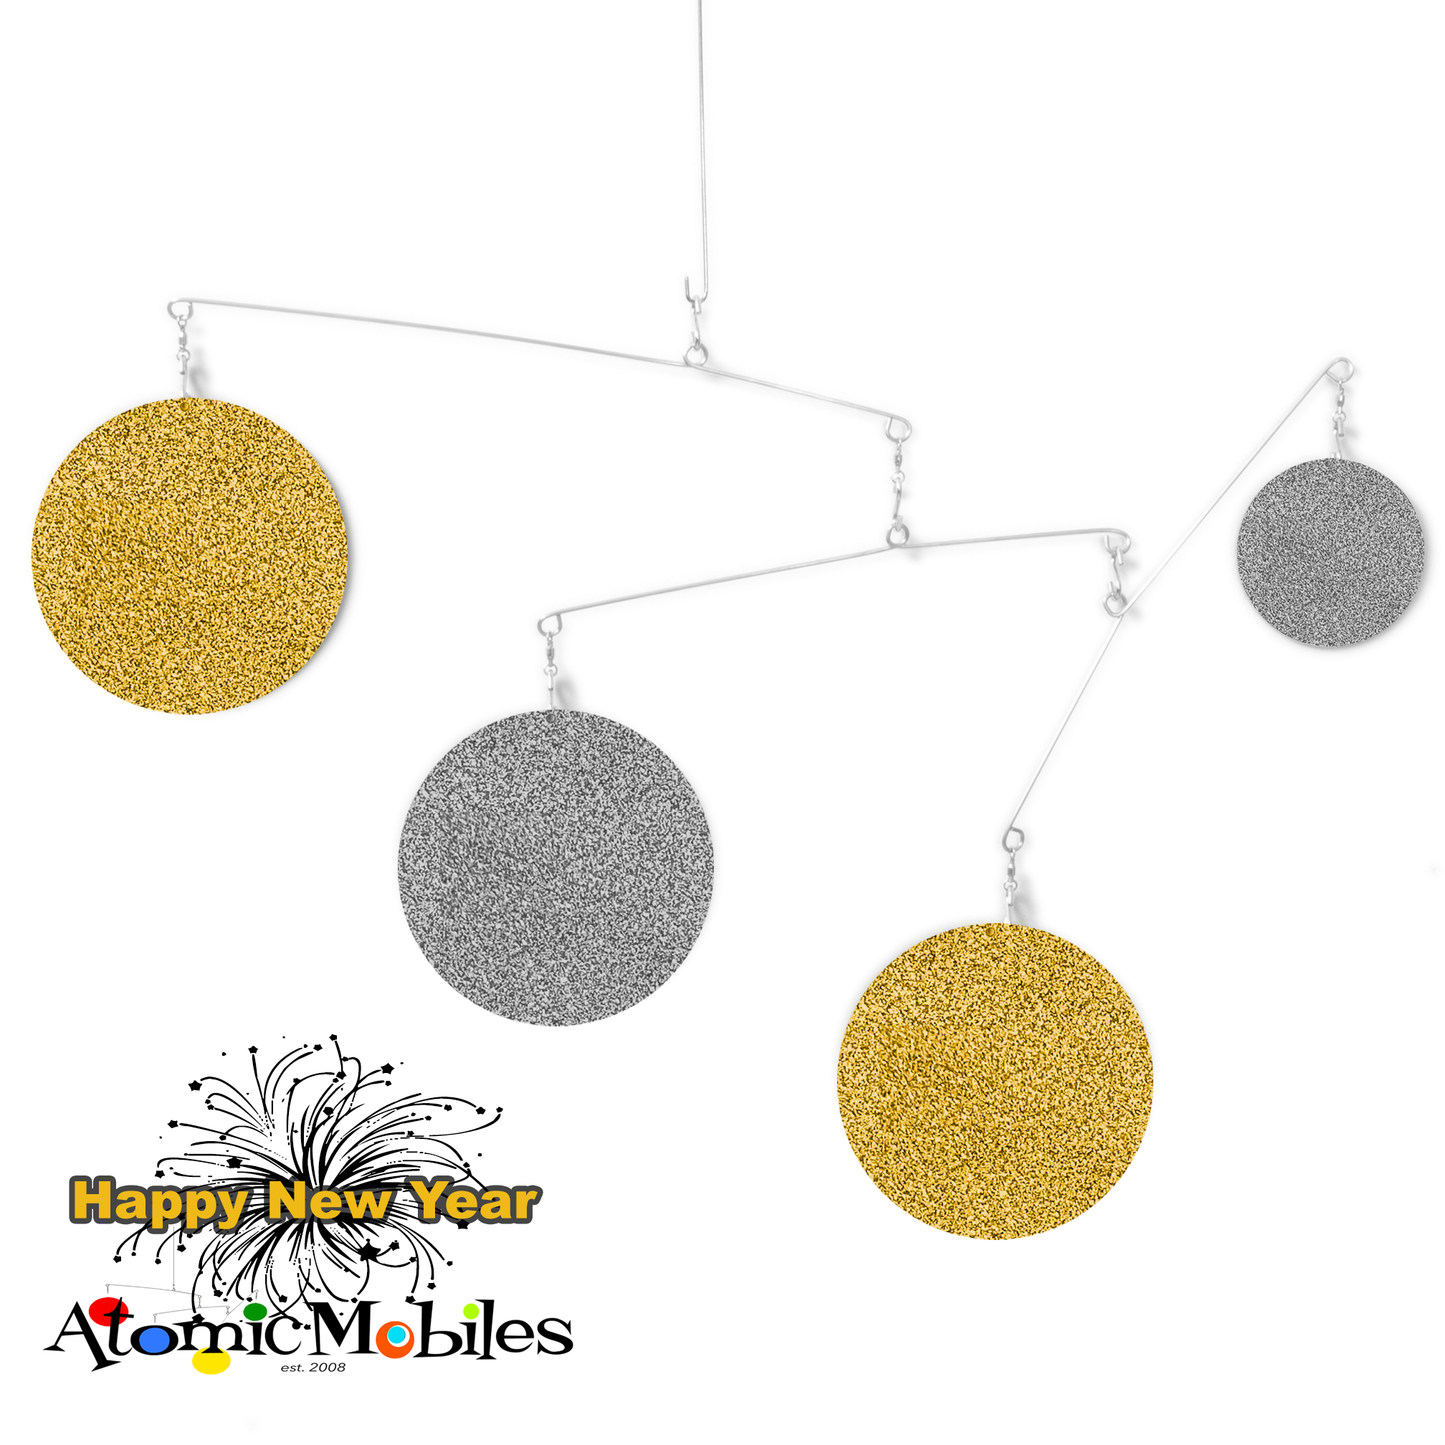 Unique New Years Eve Decoration - kinetic hanging art mobile in New Years Eve colors of Glitter Gold and Silver by AtomicMobiles.com